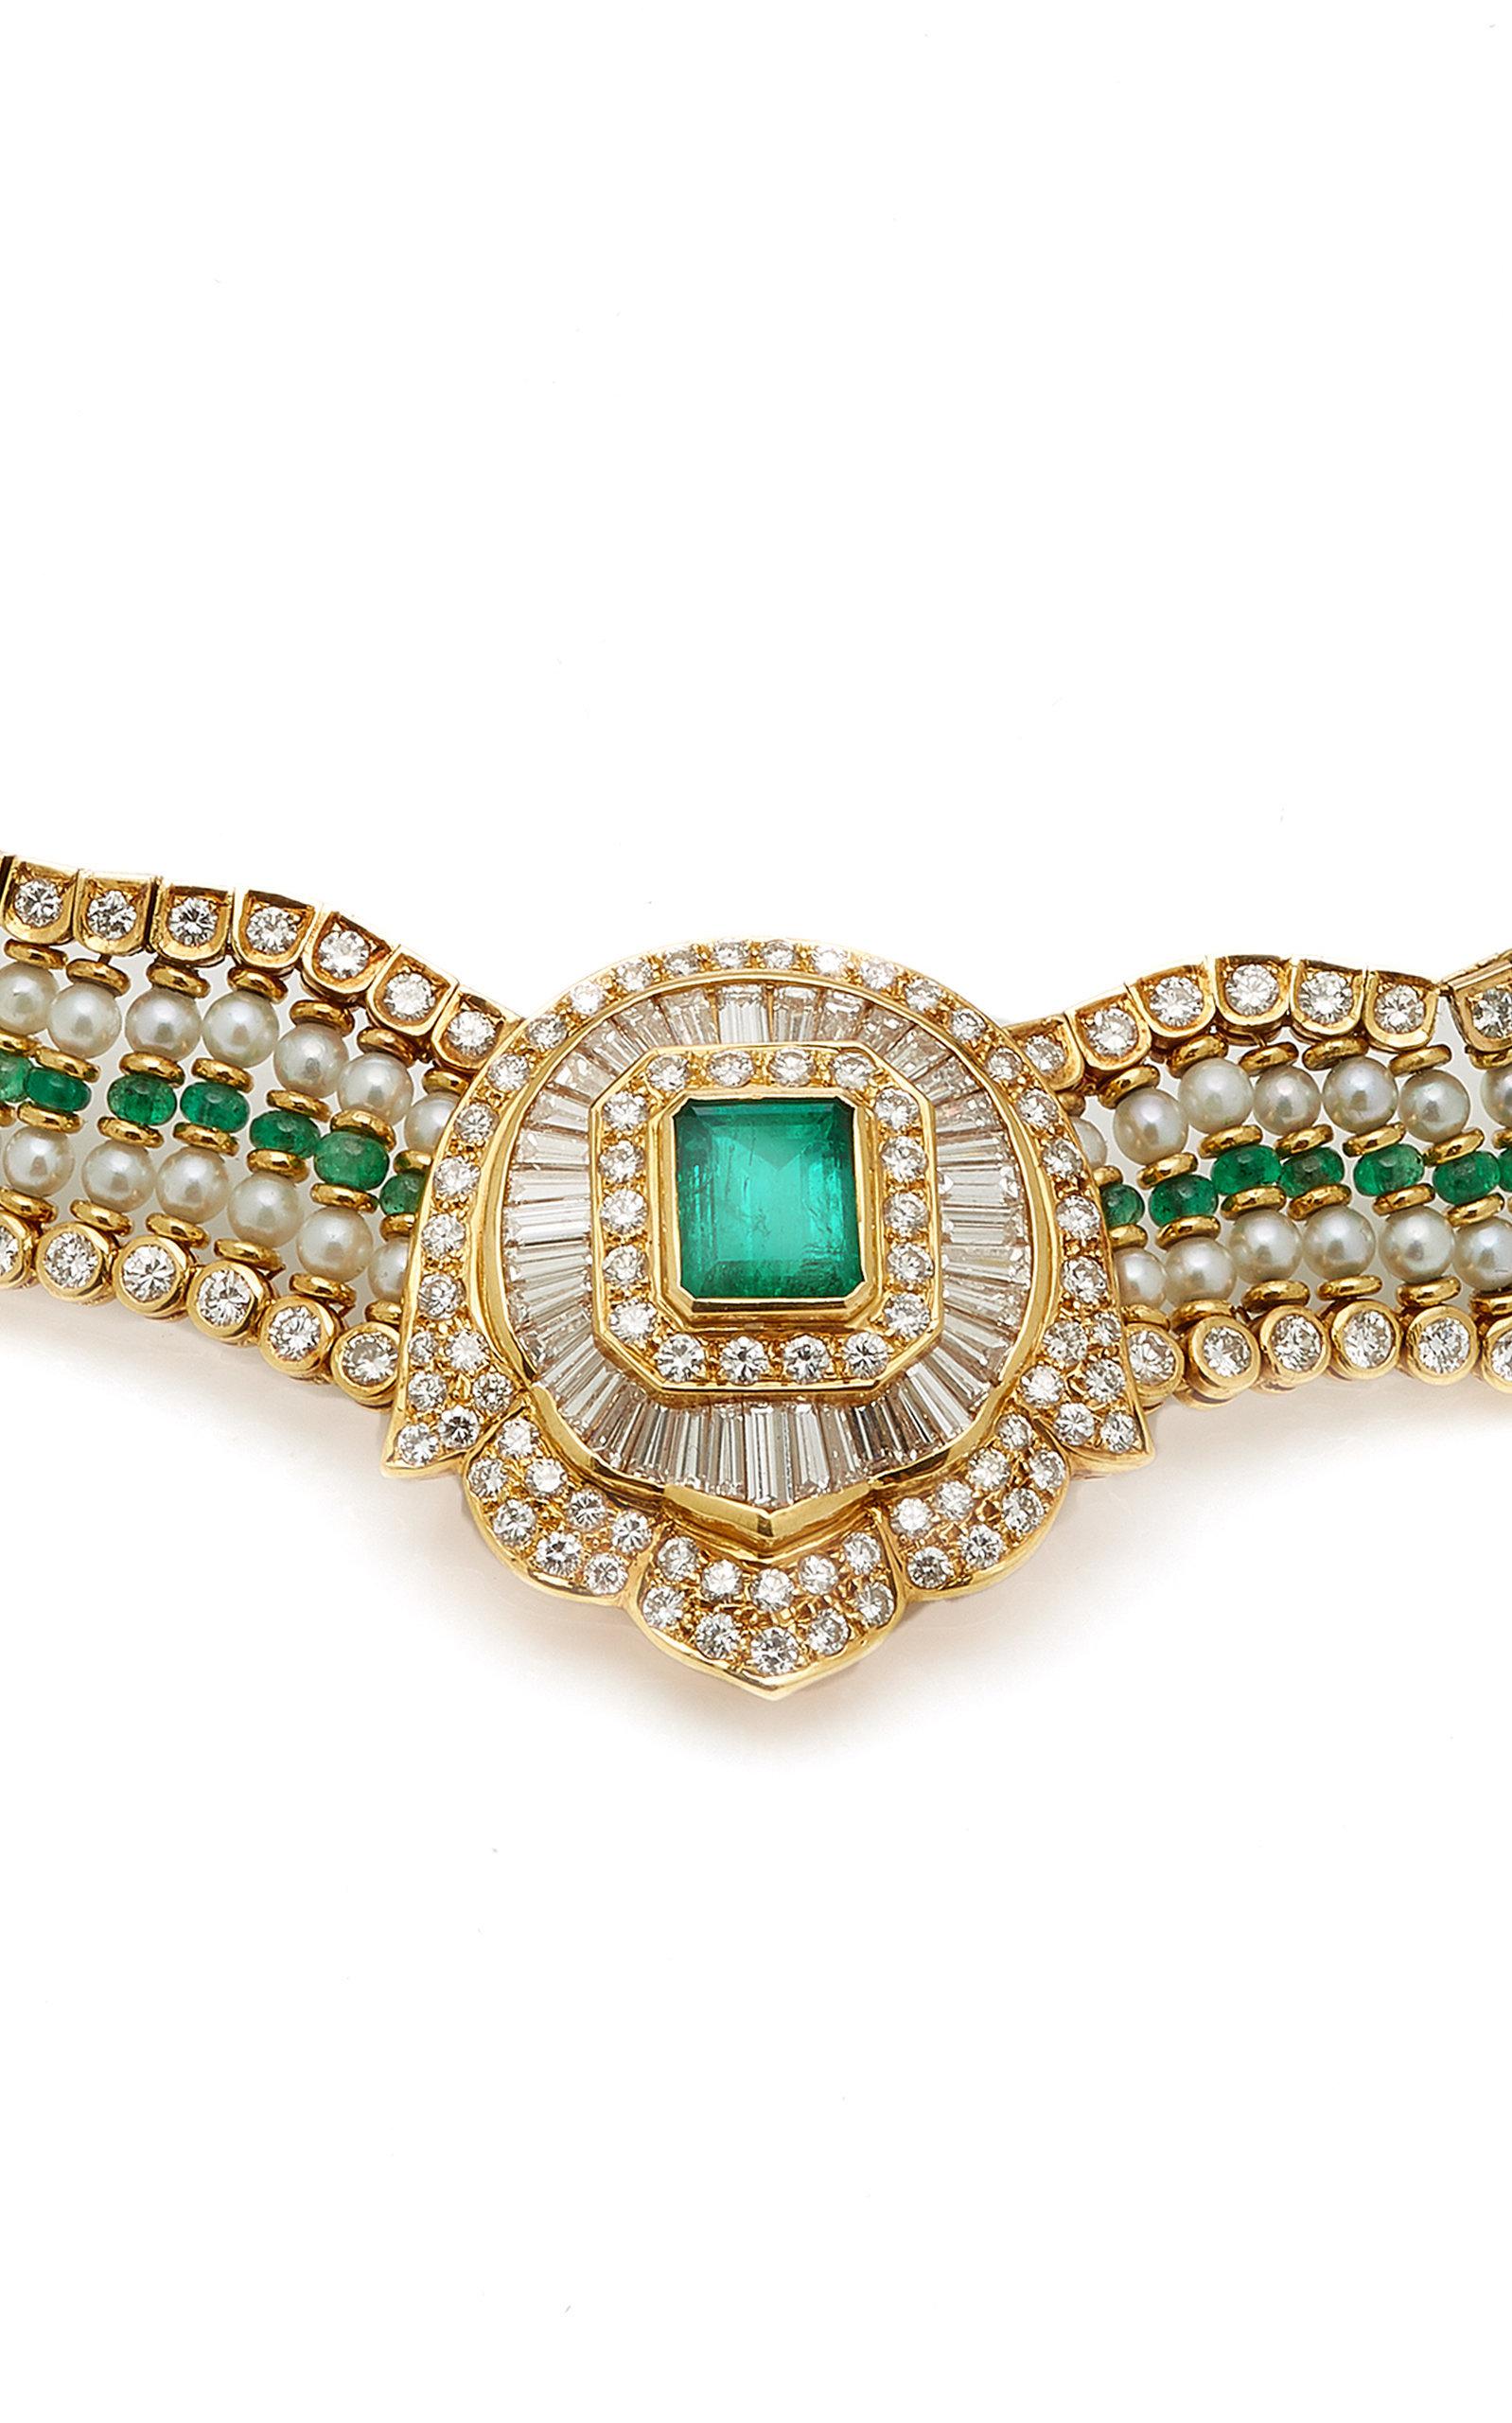 what is the exquisite emerald necklace worth